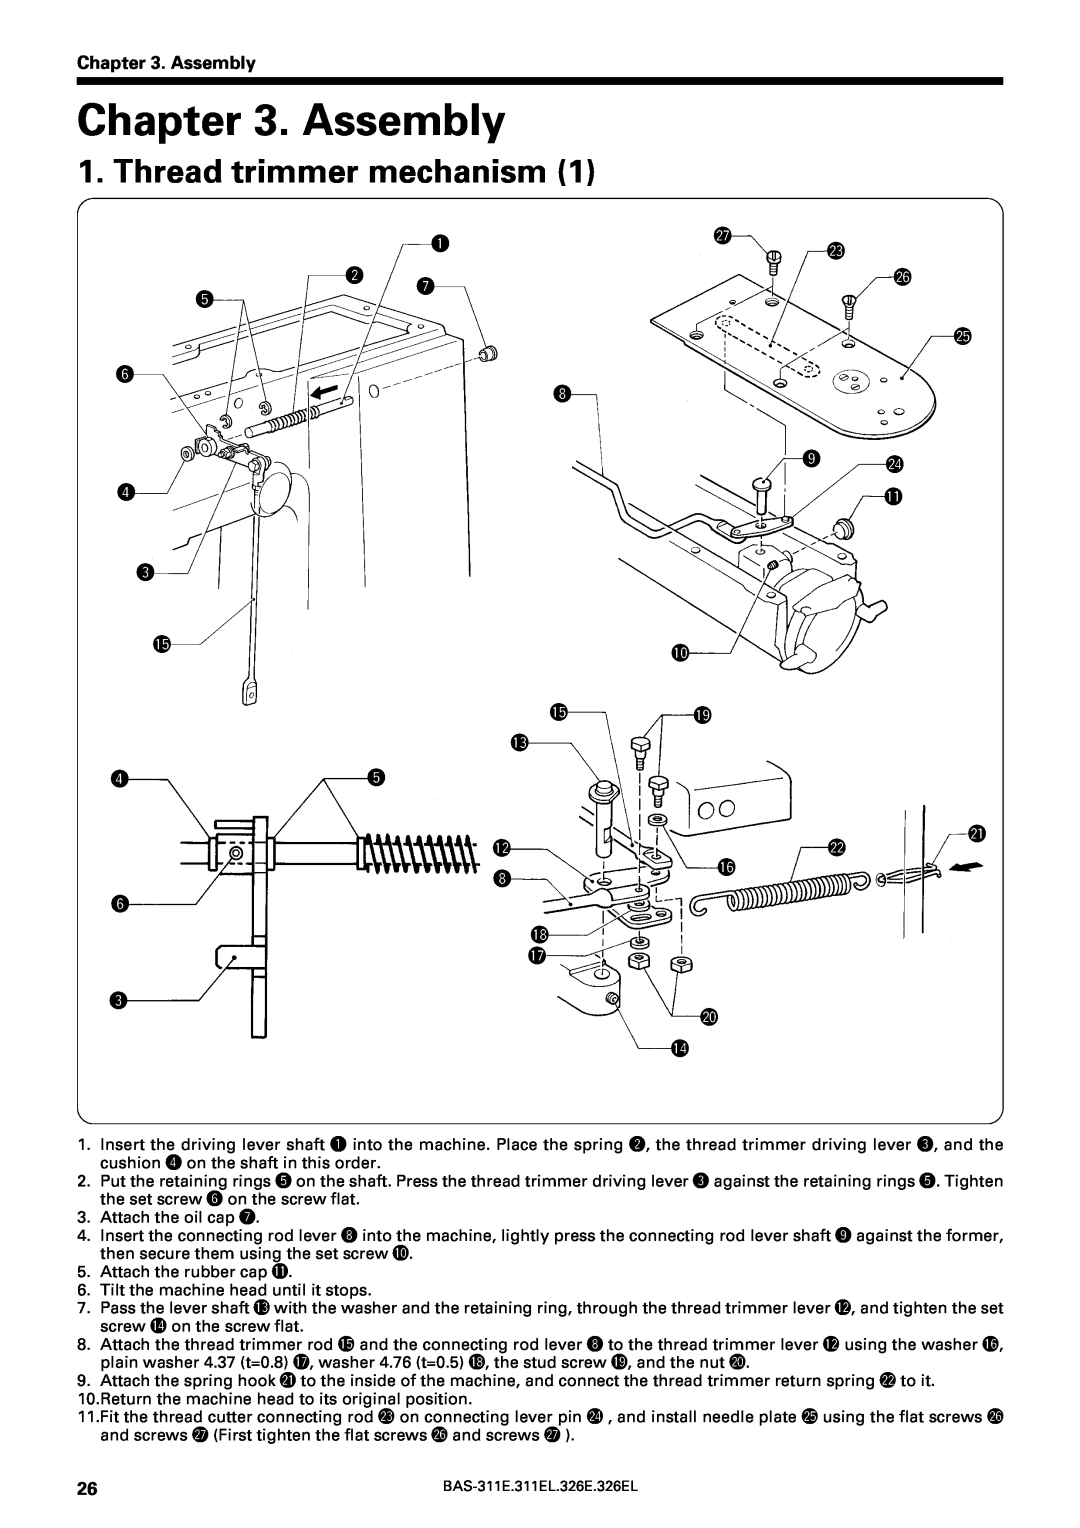 Brother BAS-311E service manual Assembly, Thread trimmer mechanism, t y r e, q w u i, @7 @3 @6 @5 o @4, r y e 